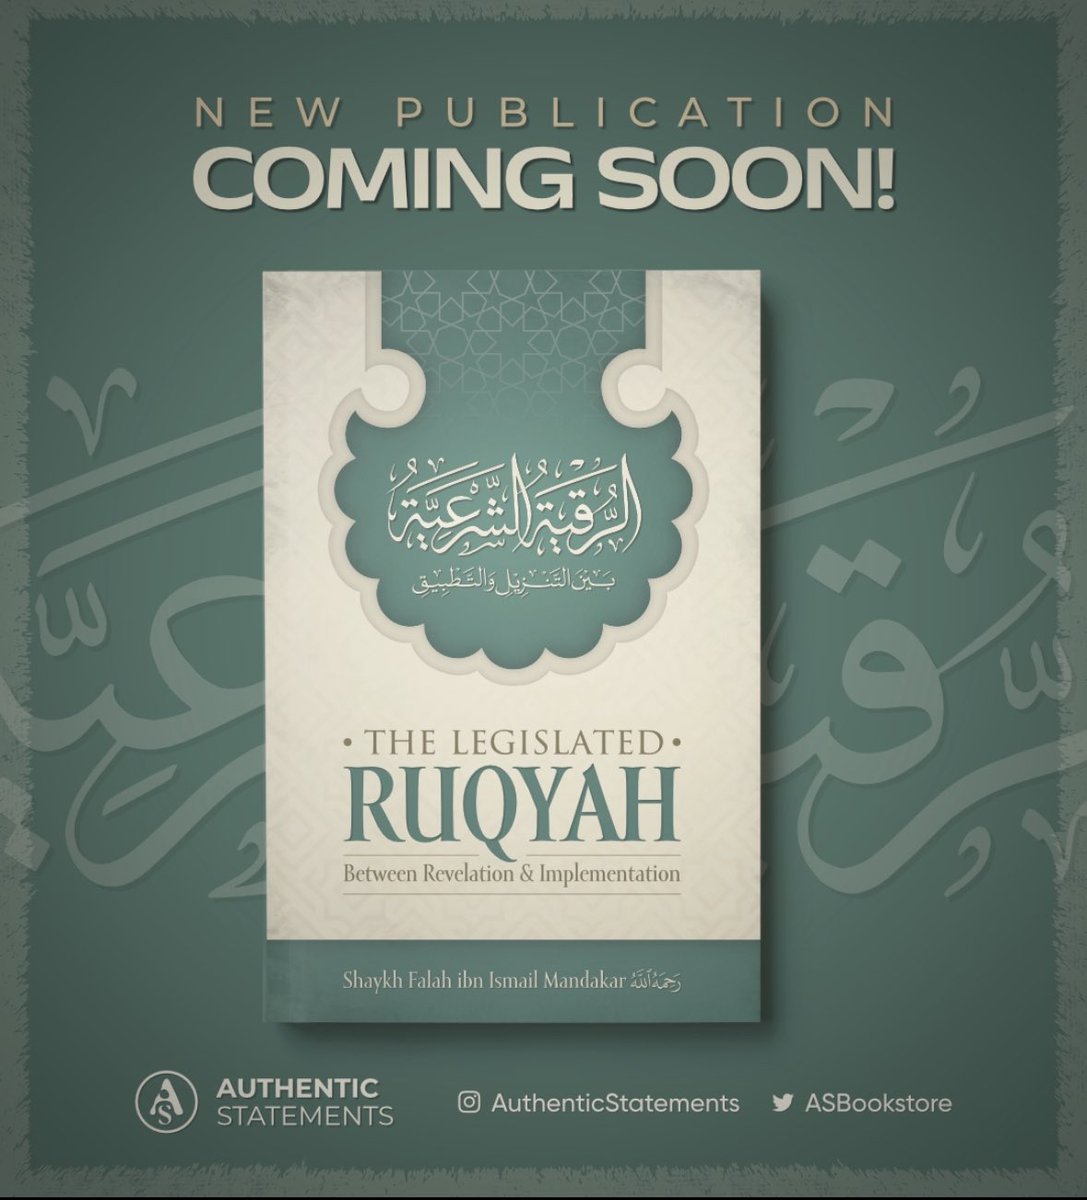 New Book Alert ! In the Printing Stage Insha Allah , will be available very soon.